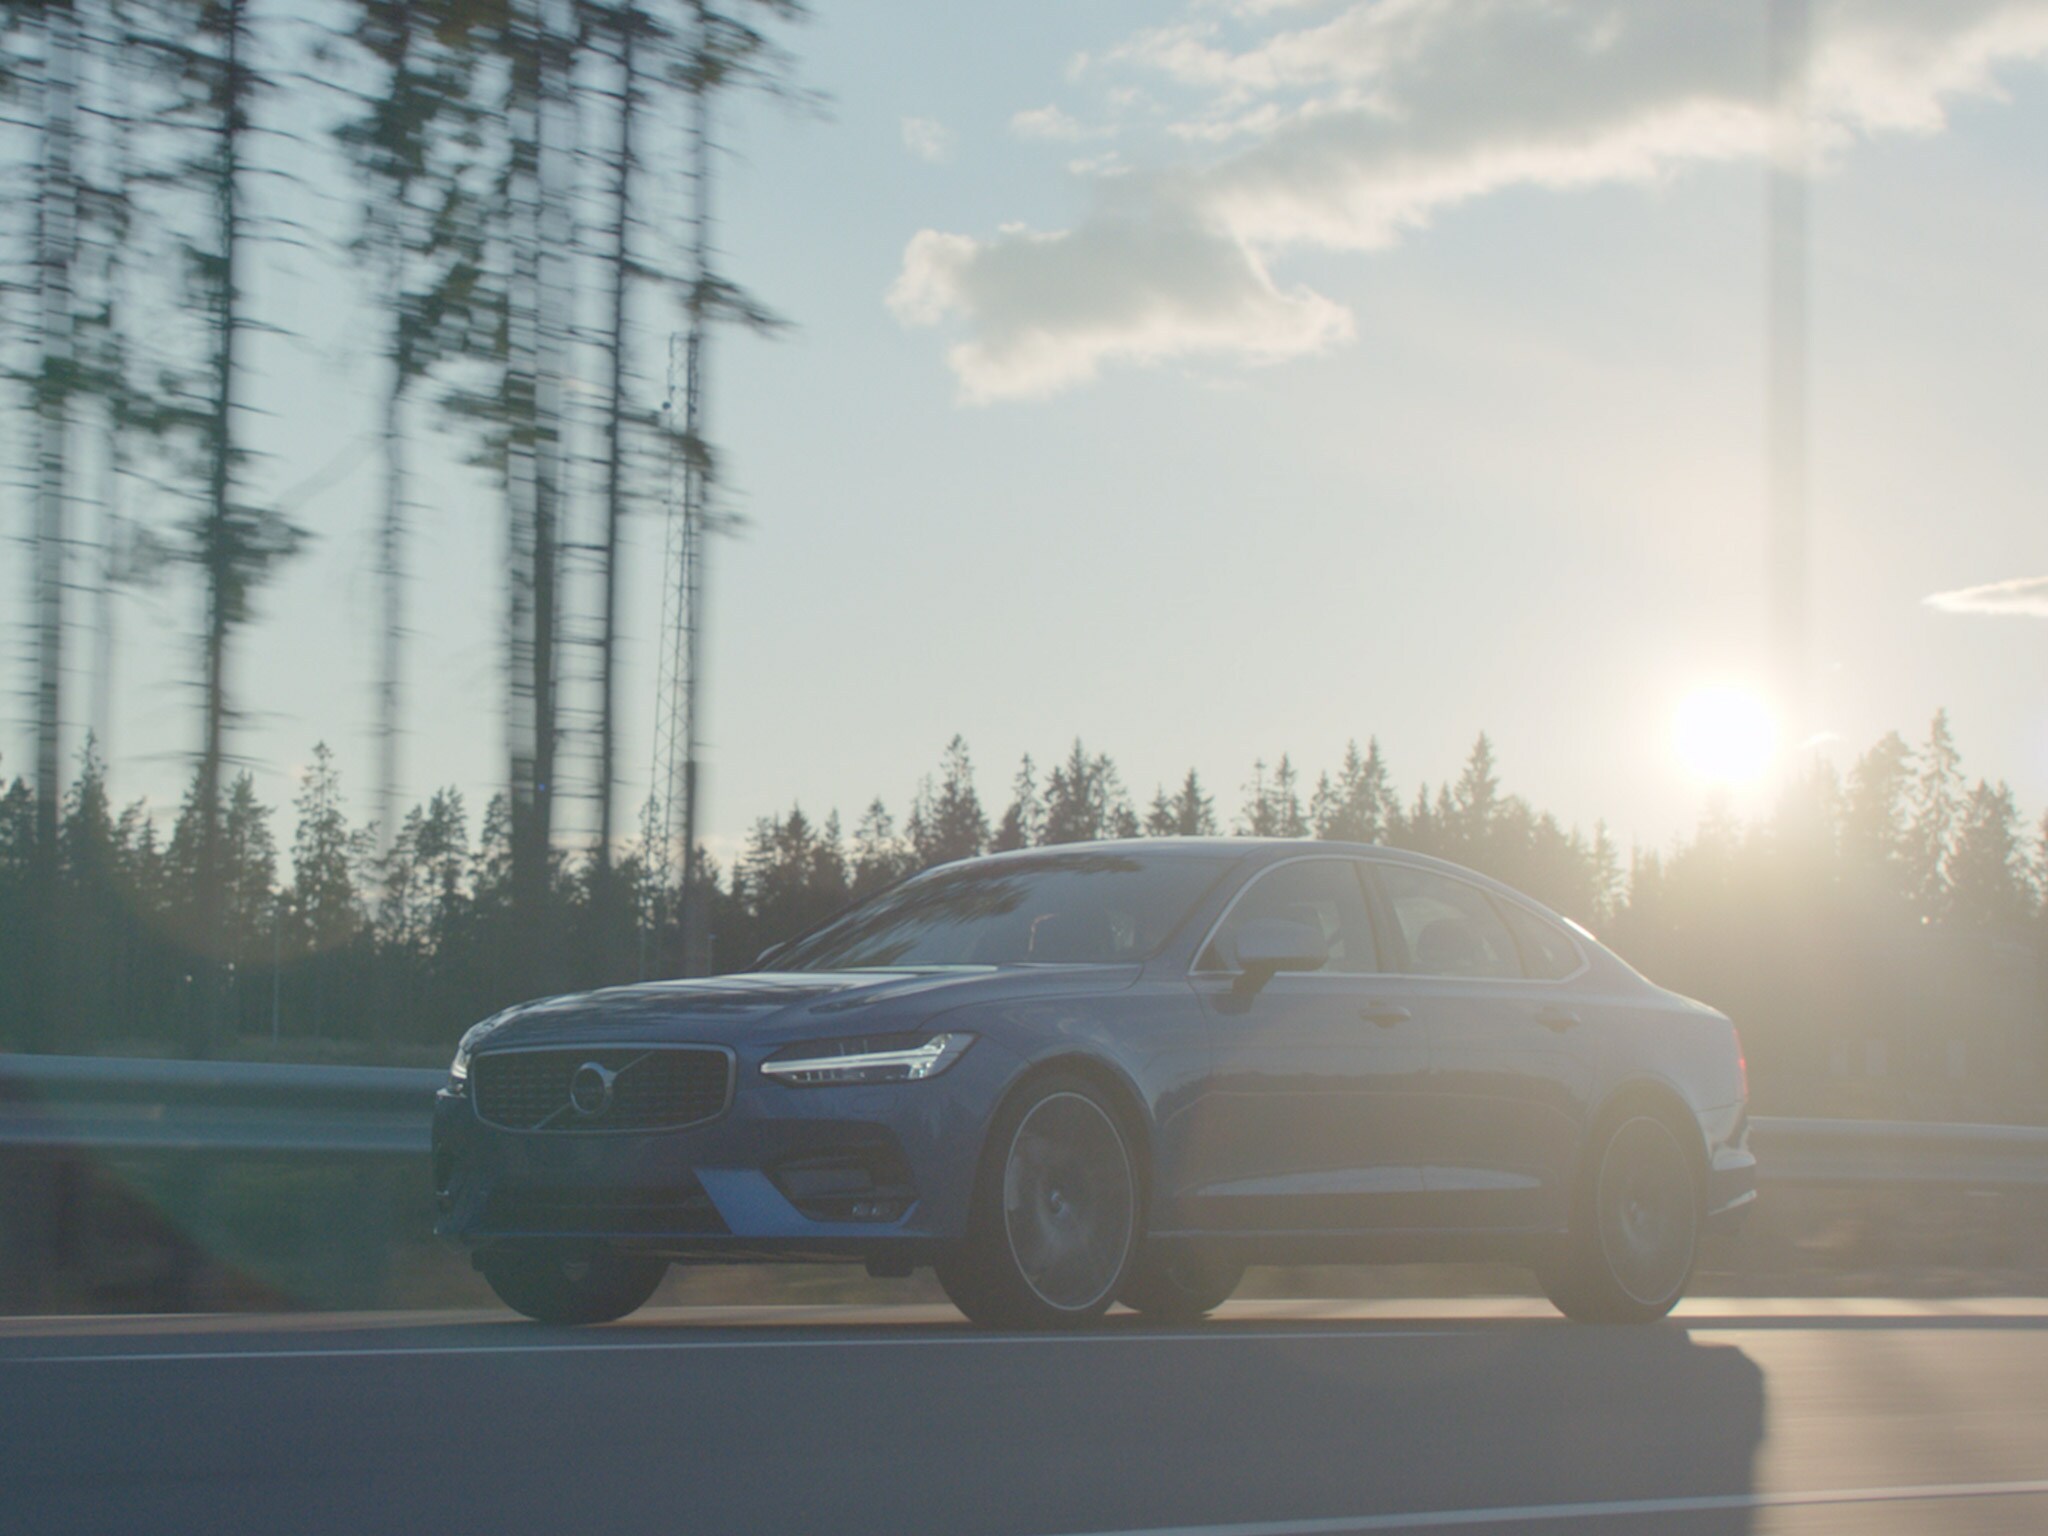 Wide shot of a Denim Blue Volvo S90 sedan moving along a forested road on a sunny day.